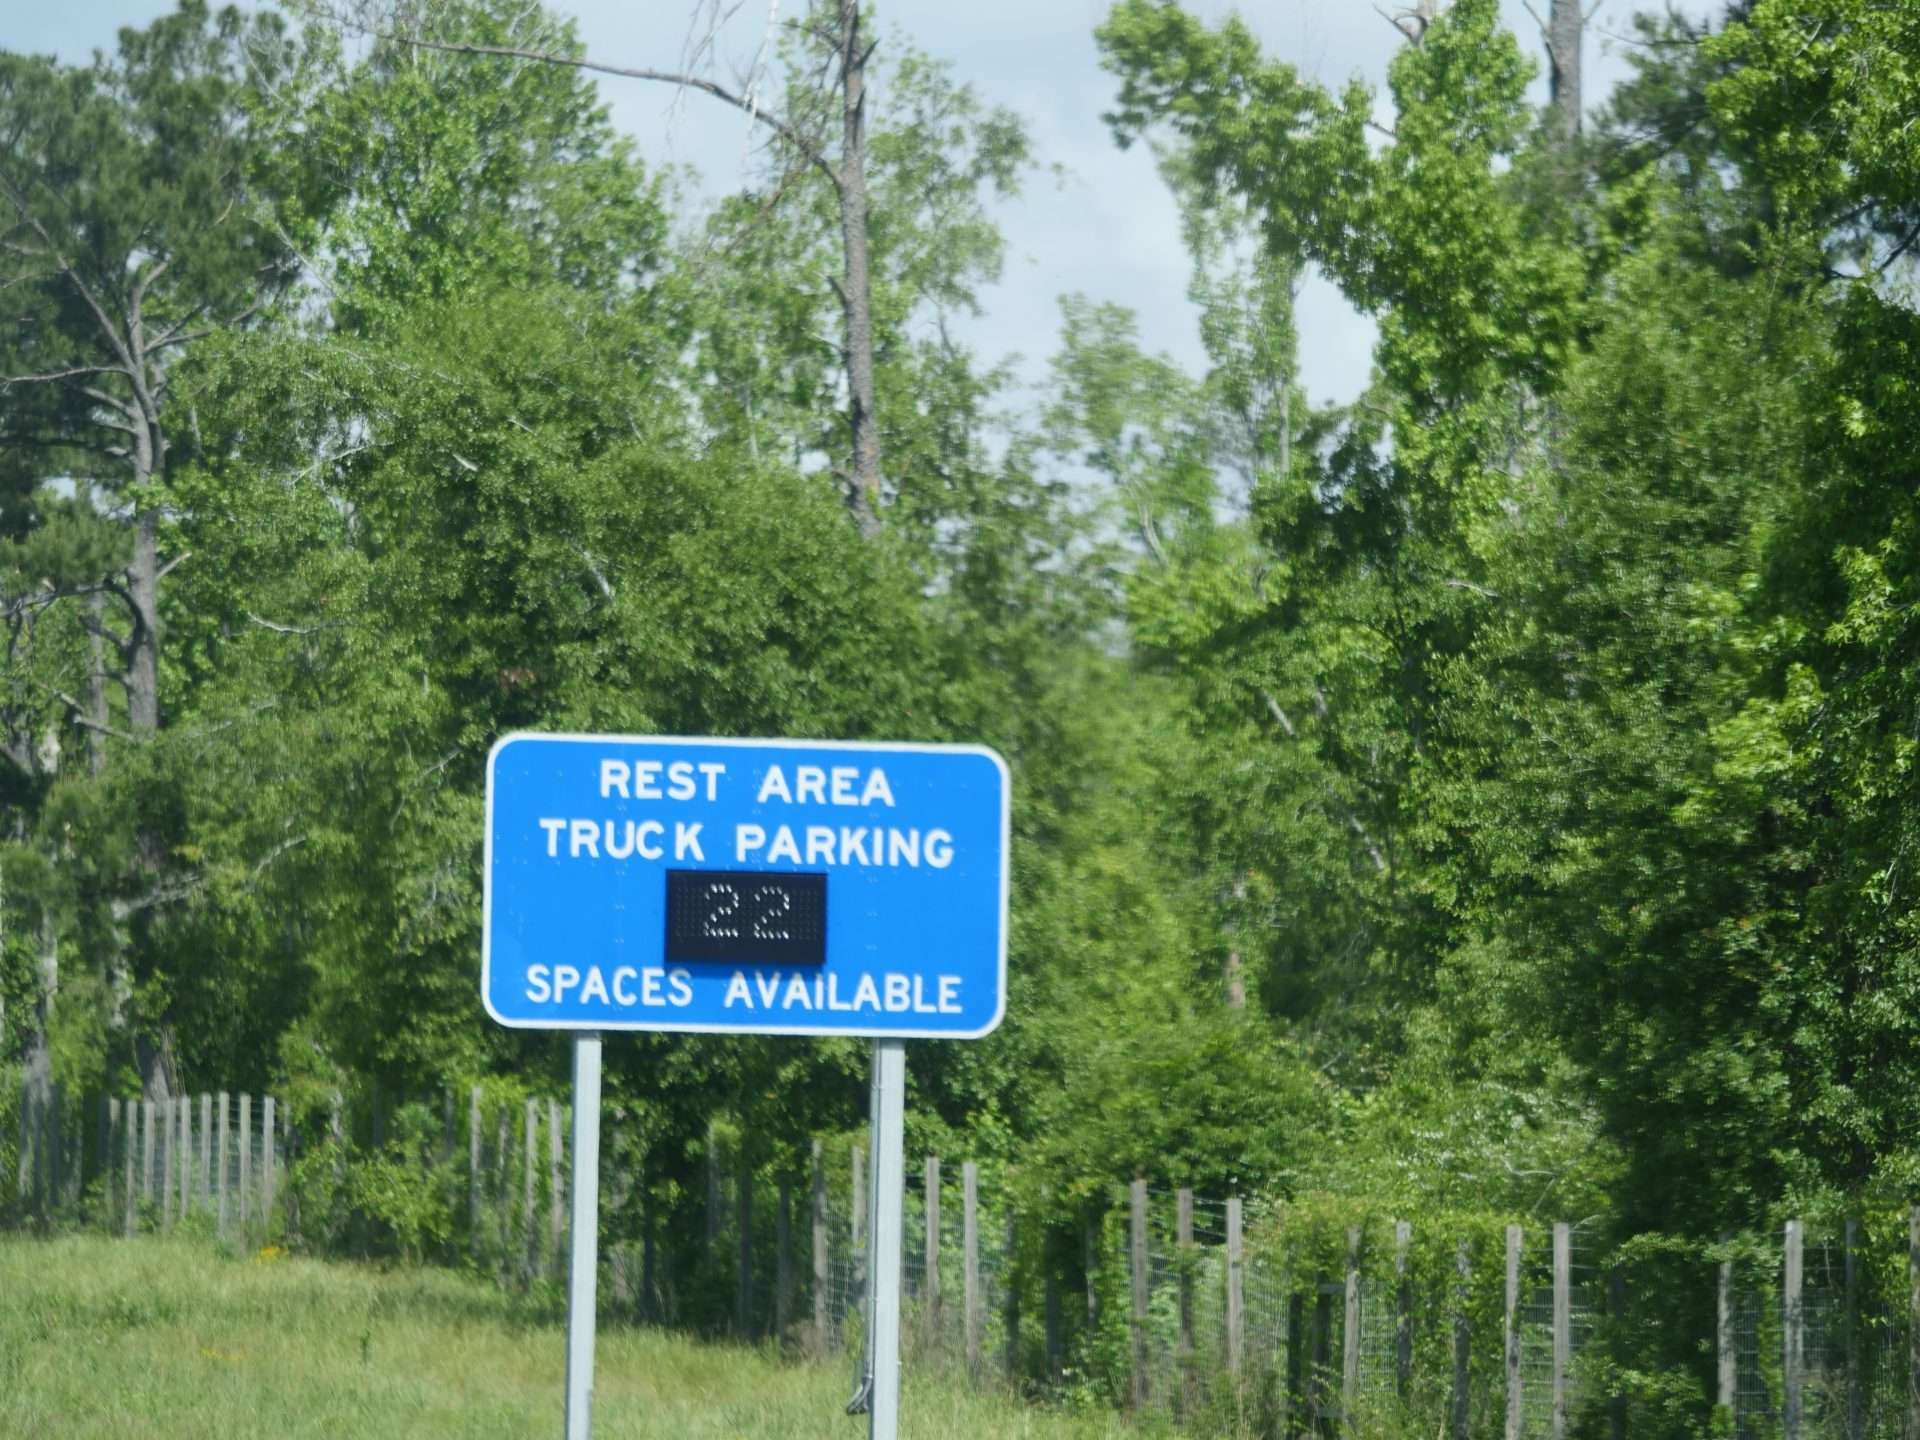 Rest area parking space availability sign